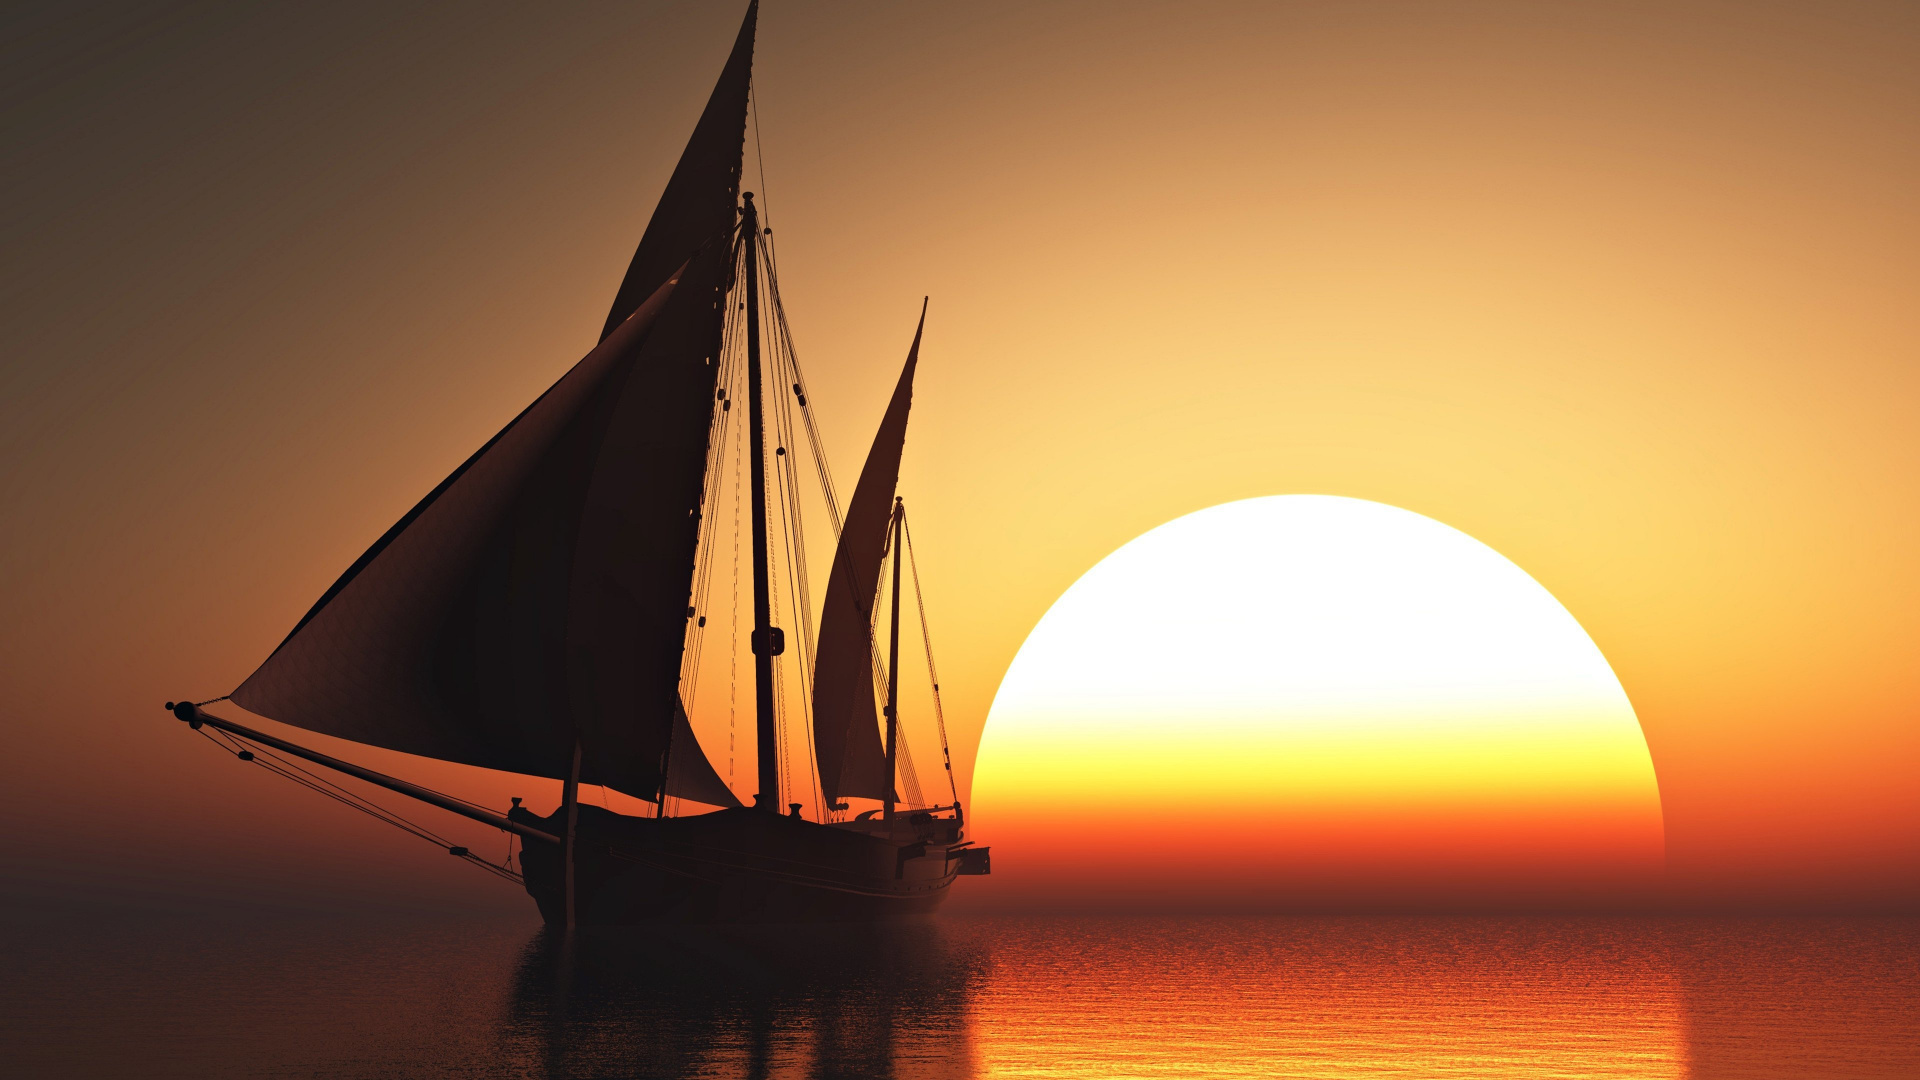 Silhouette of Sailboat on Sea During Sunset. Wallpaper in 1920x1080 Resolution